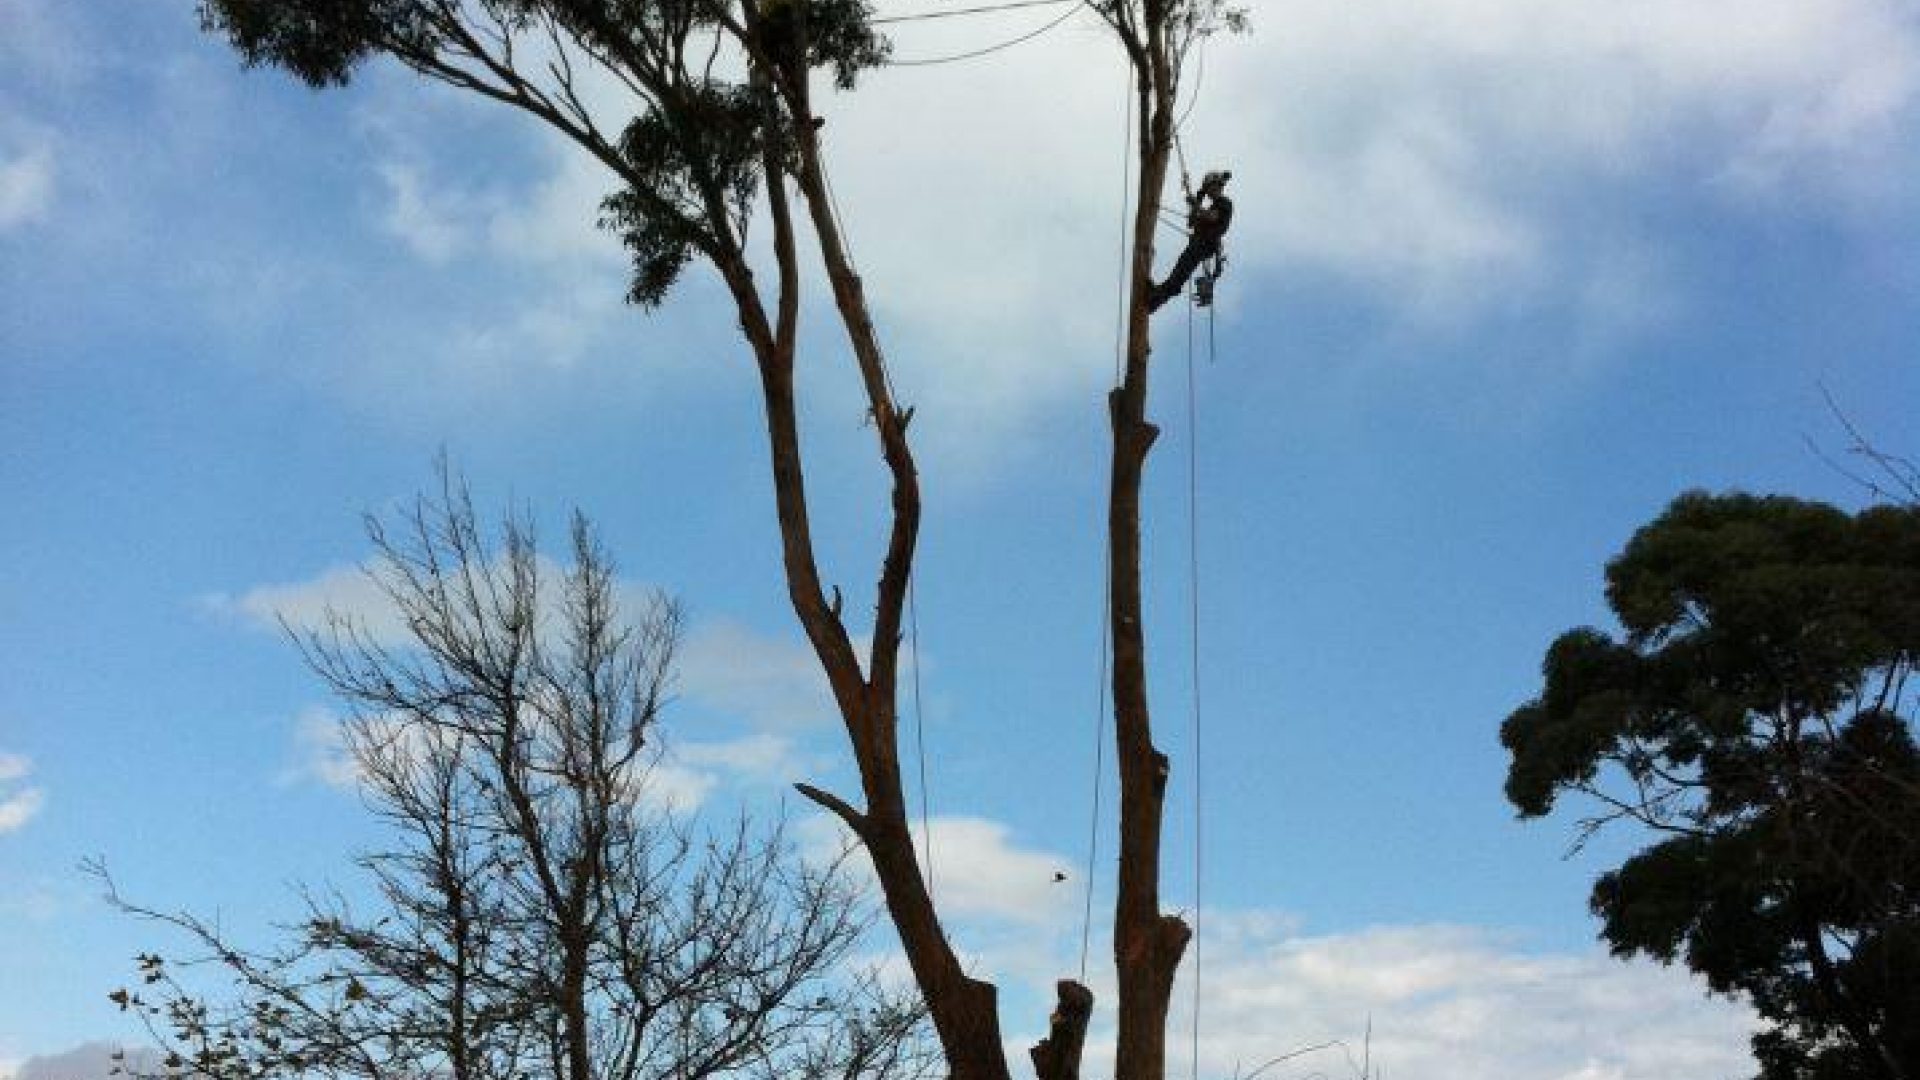 MT ELIZA TREE REMOVAL AND PRUNING SERVICE